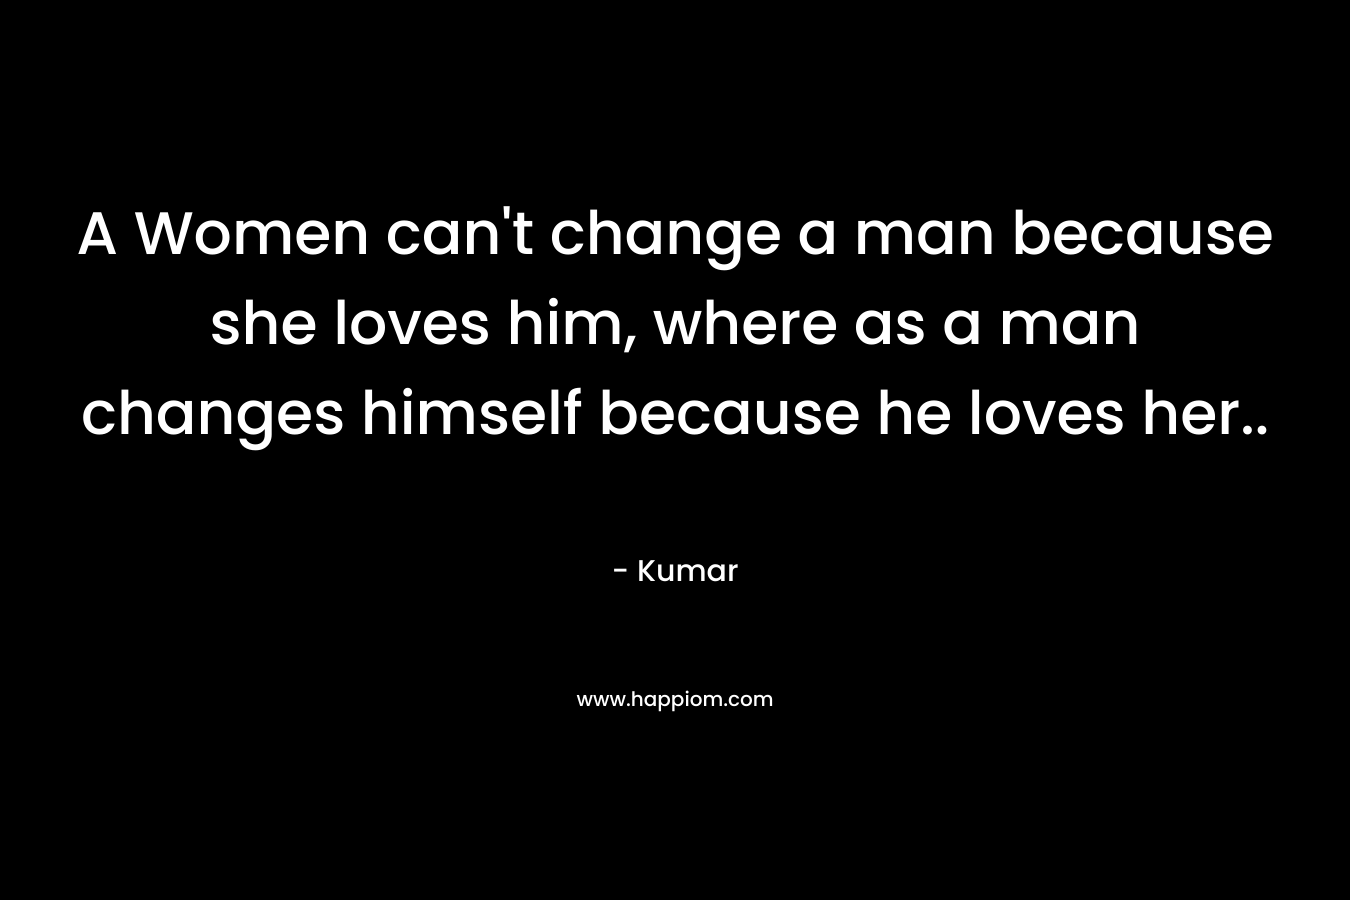 A Women can't change a man because she loves him, where as a man changes himself because he loves her..